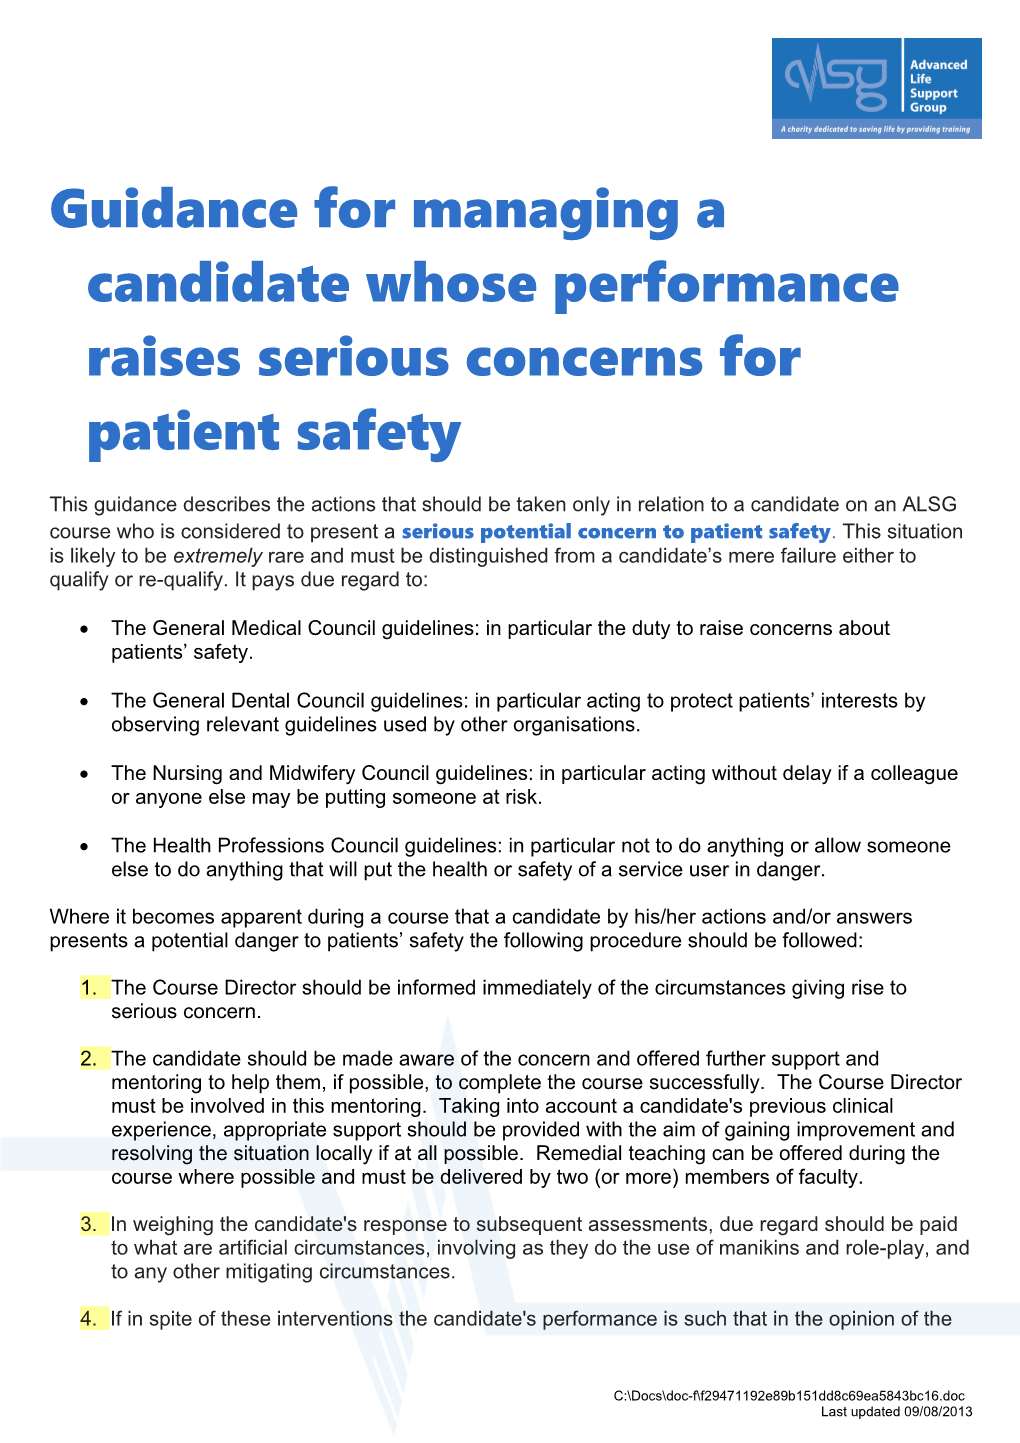 Guidance for Managing a Candidate Whose Performance Raises Serious Concerns for Patient Safety